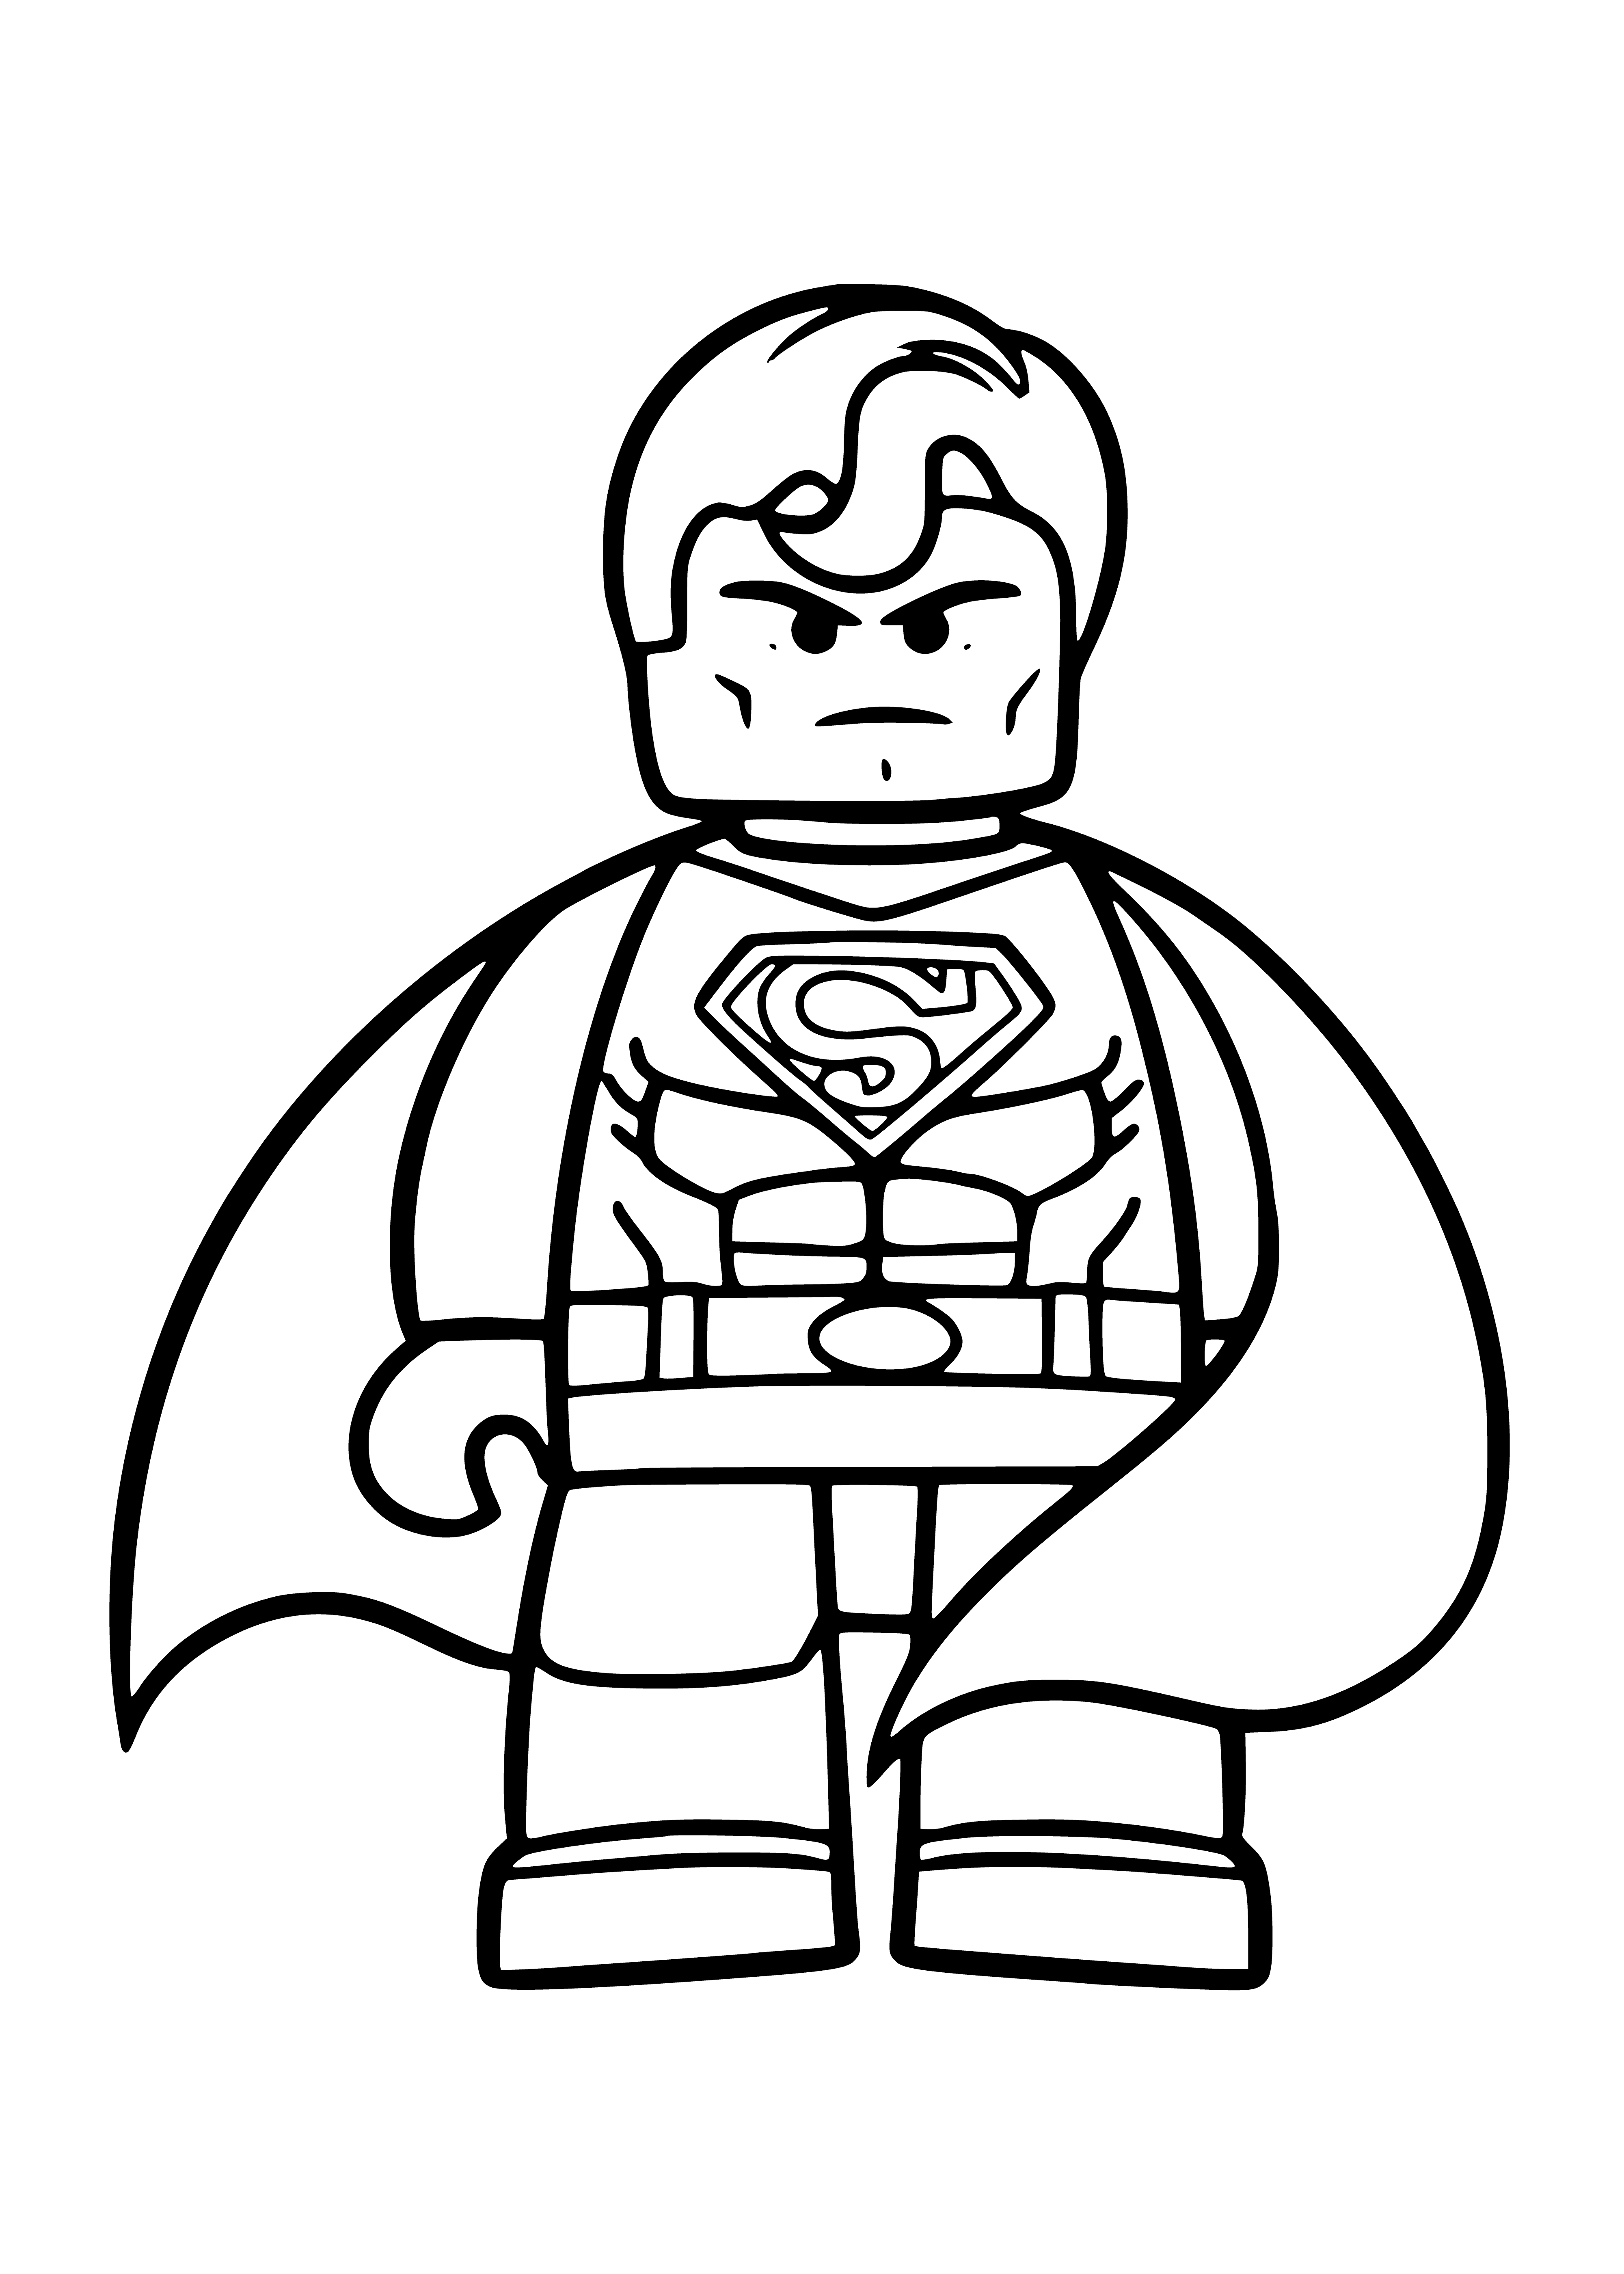 coloring page: Lego Superman figure: mostly blue and red with yellow belt and red cape, with arms crossed.